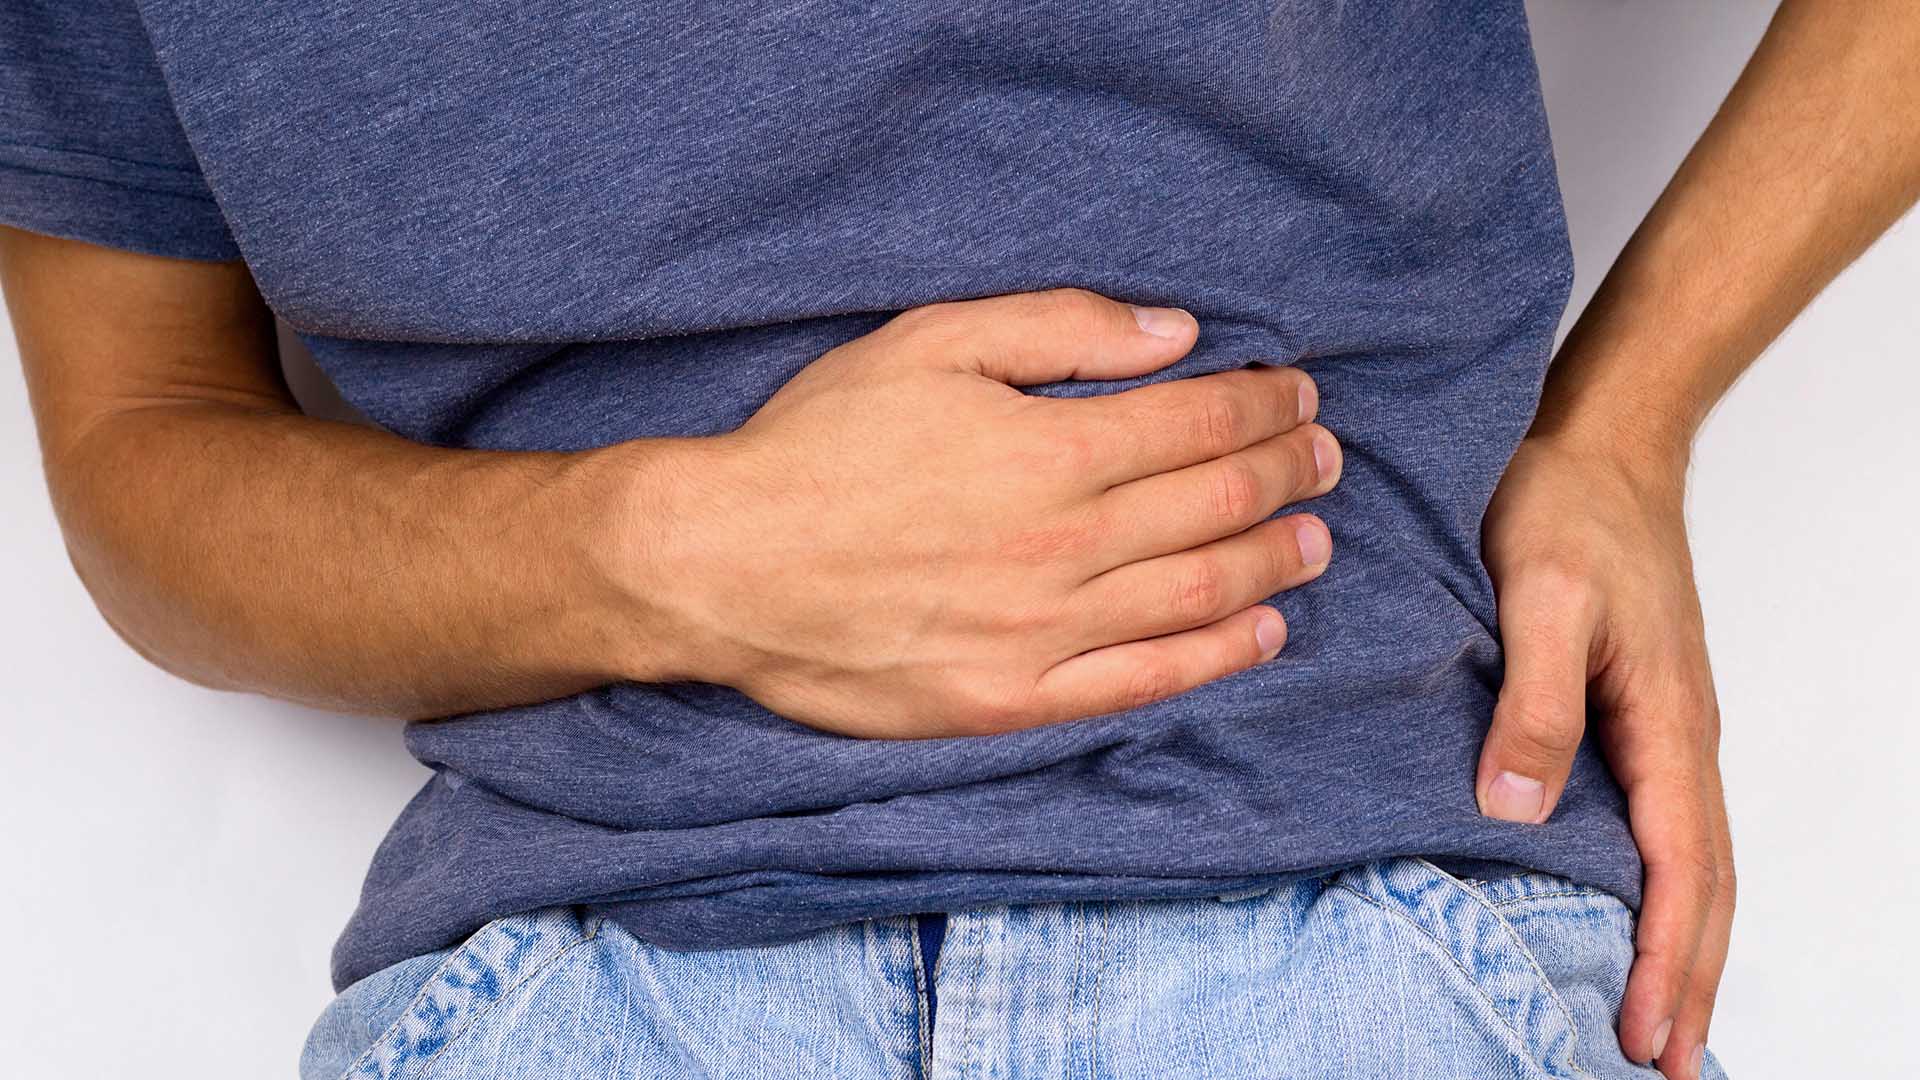 young man in jeans and t-shirt holds hands to his stomach and back, hernia or sports back injury concept